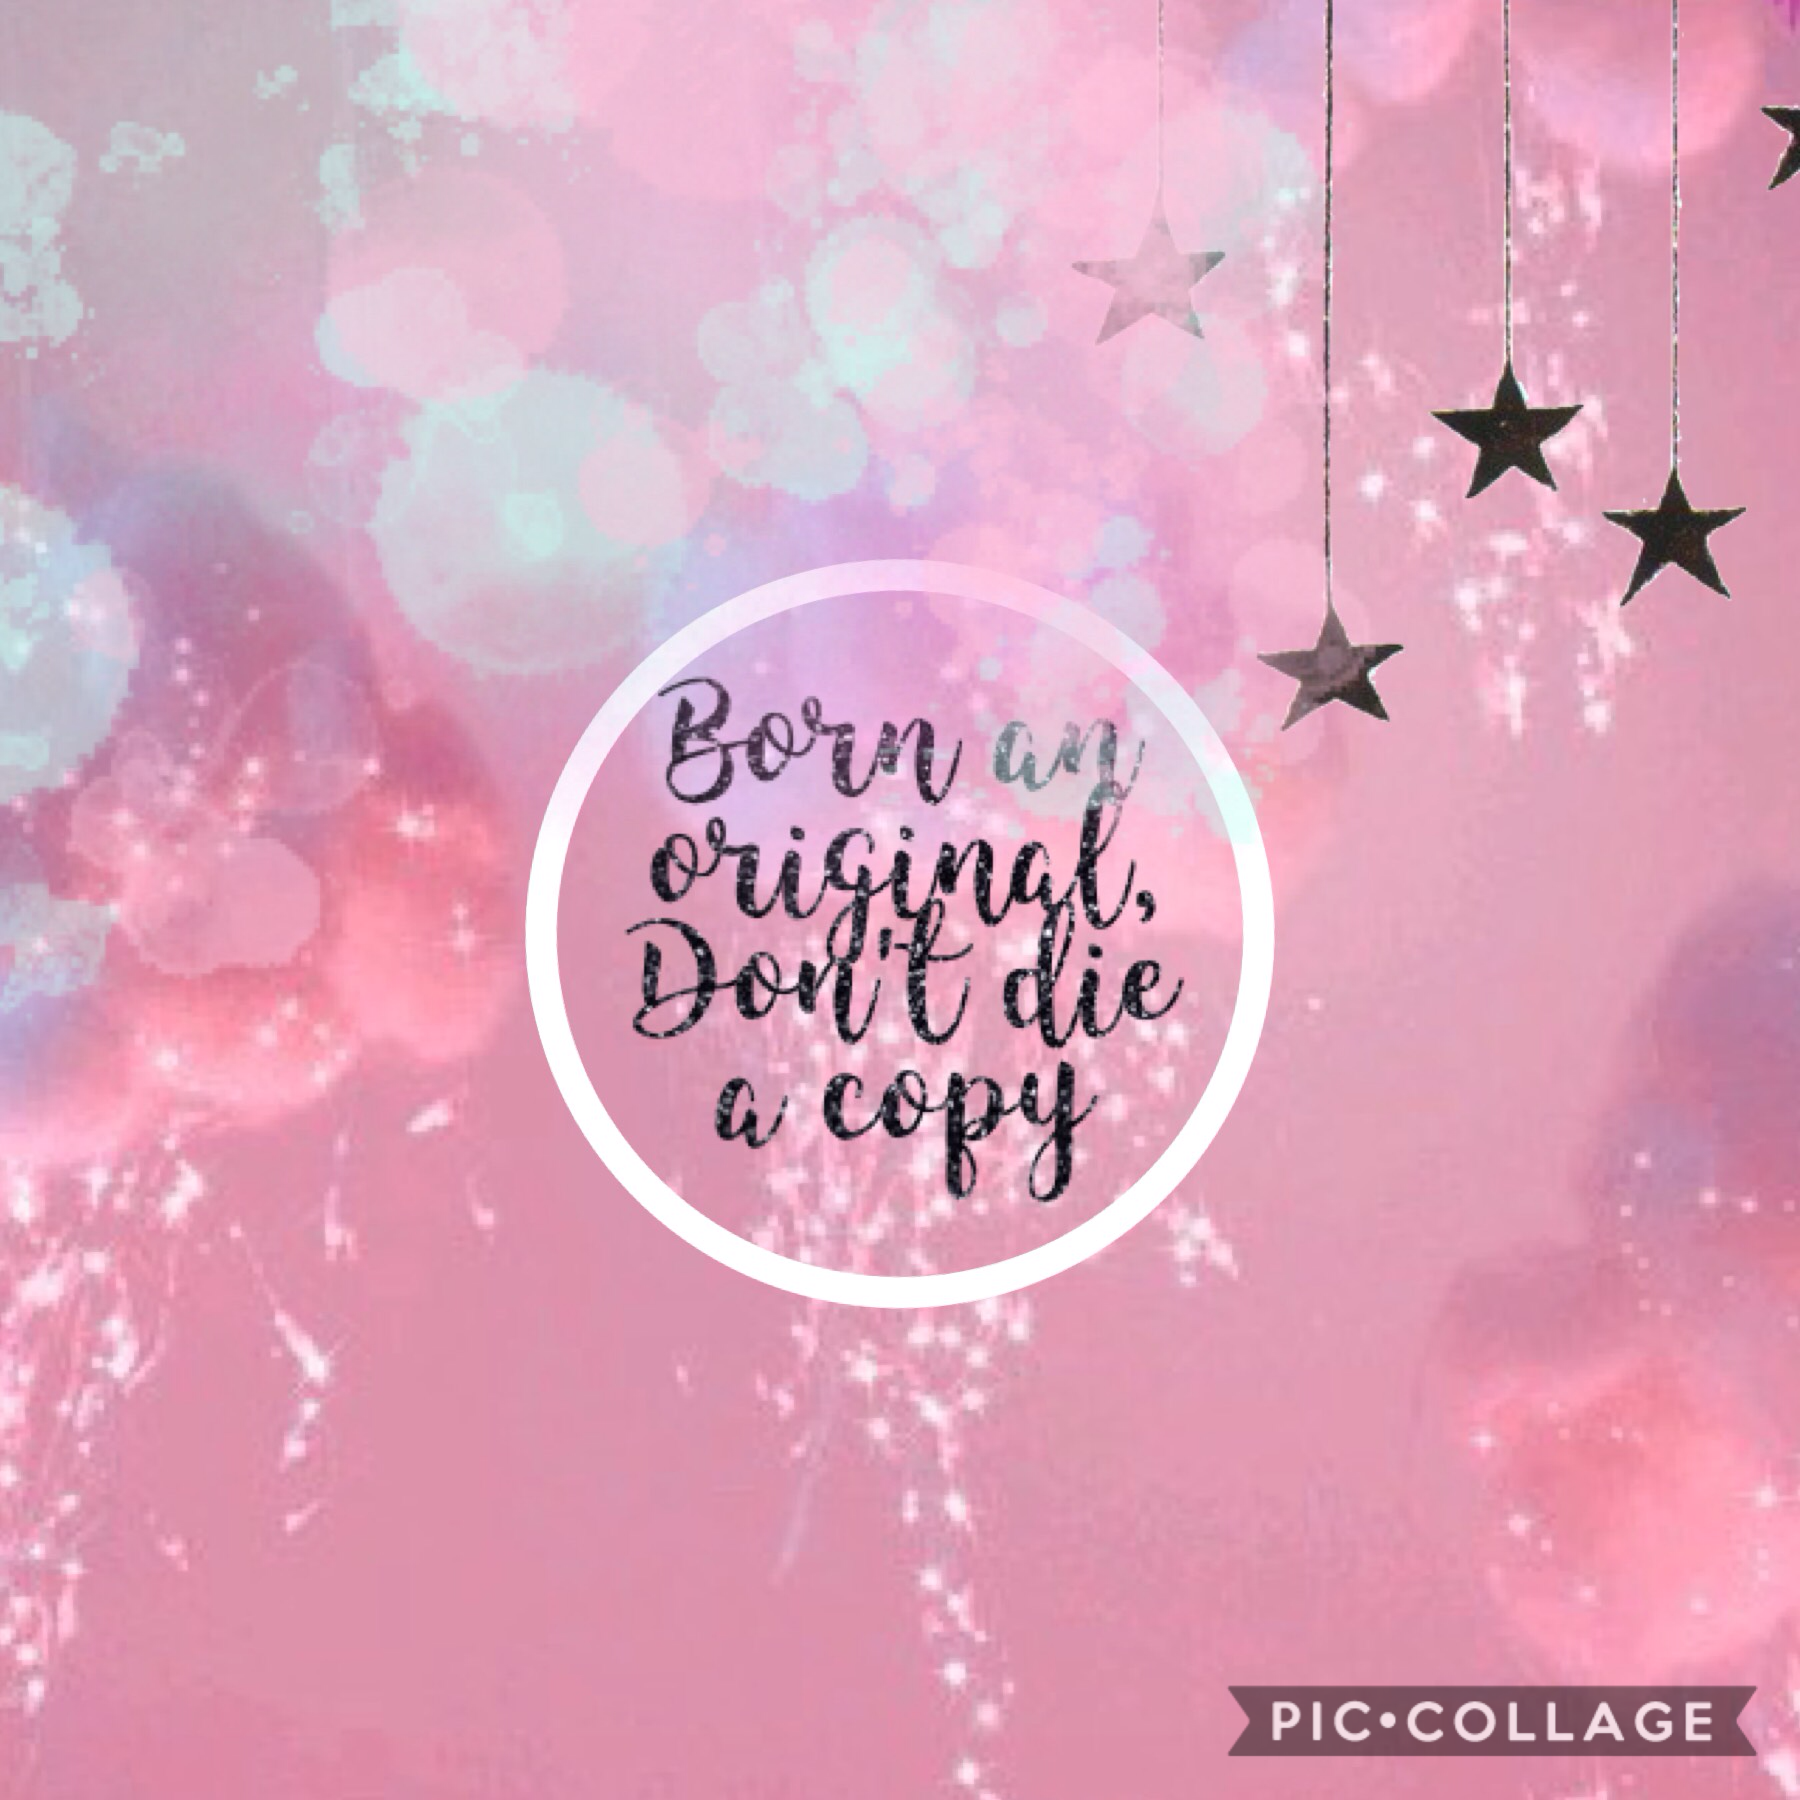 Tappy🦄

"Born a original, don't die a copy" 
It mean you were born as yourself but you don't need pretend to be someone. Don't die a copy. 